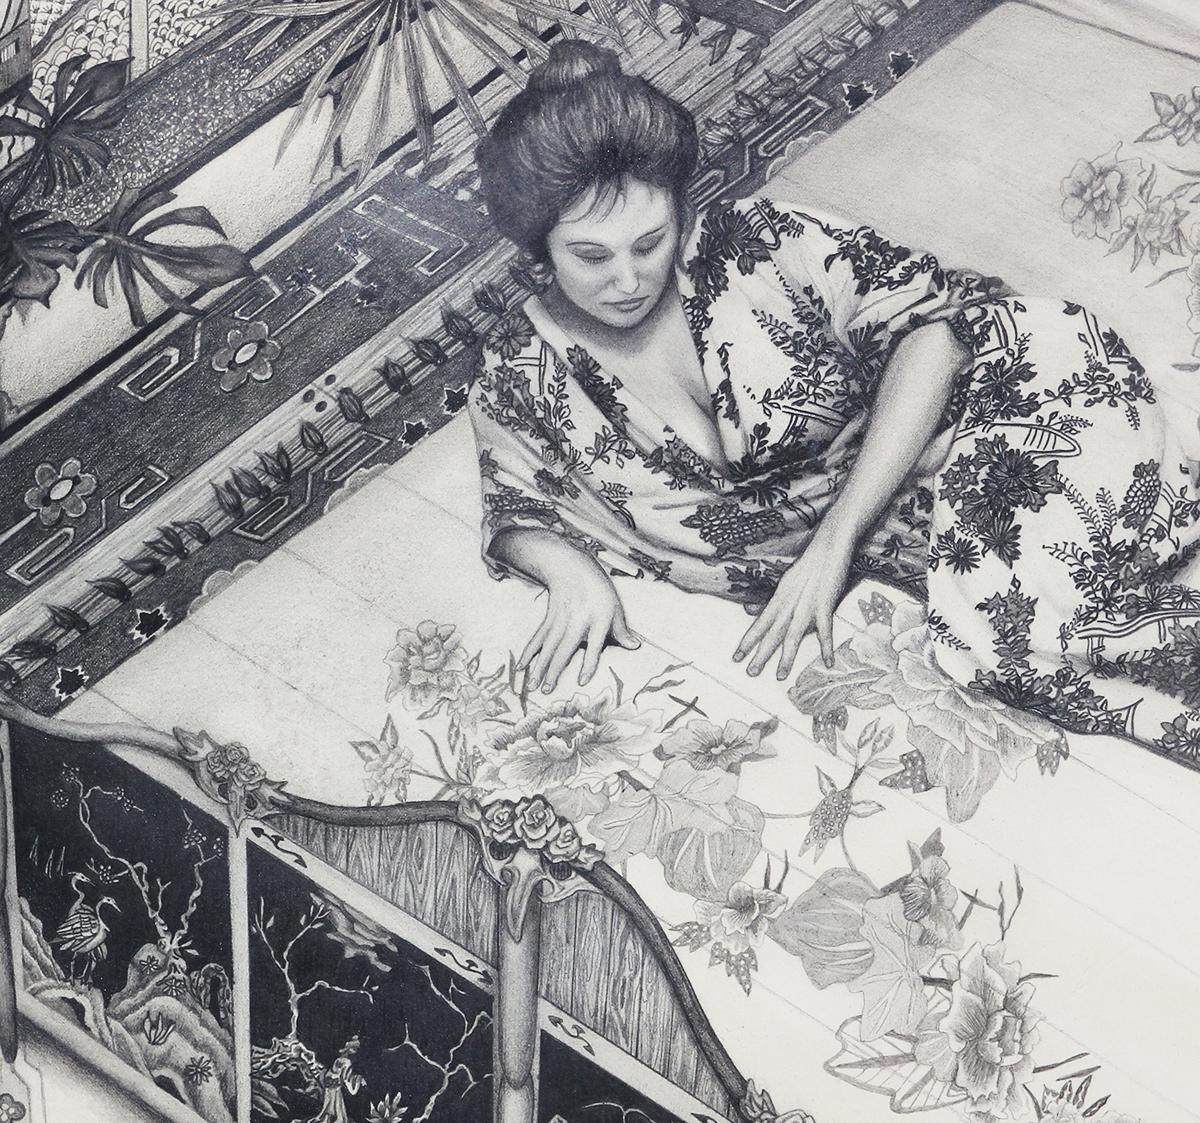 Black and white naturalistic interior scene pencil drawing by artist Douglas Schneider. The work features a young woman laying on an intricate bedspread in a highly decorated room. Signed and dated by artist in front lower right corner. Currently